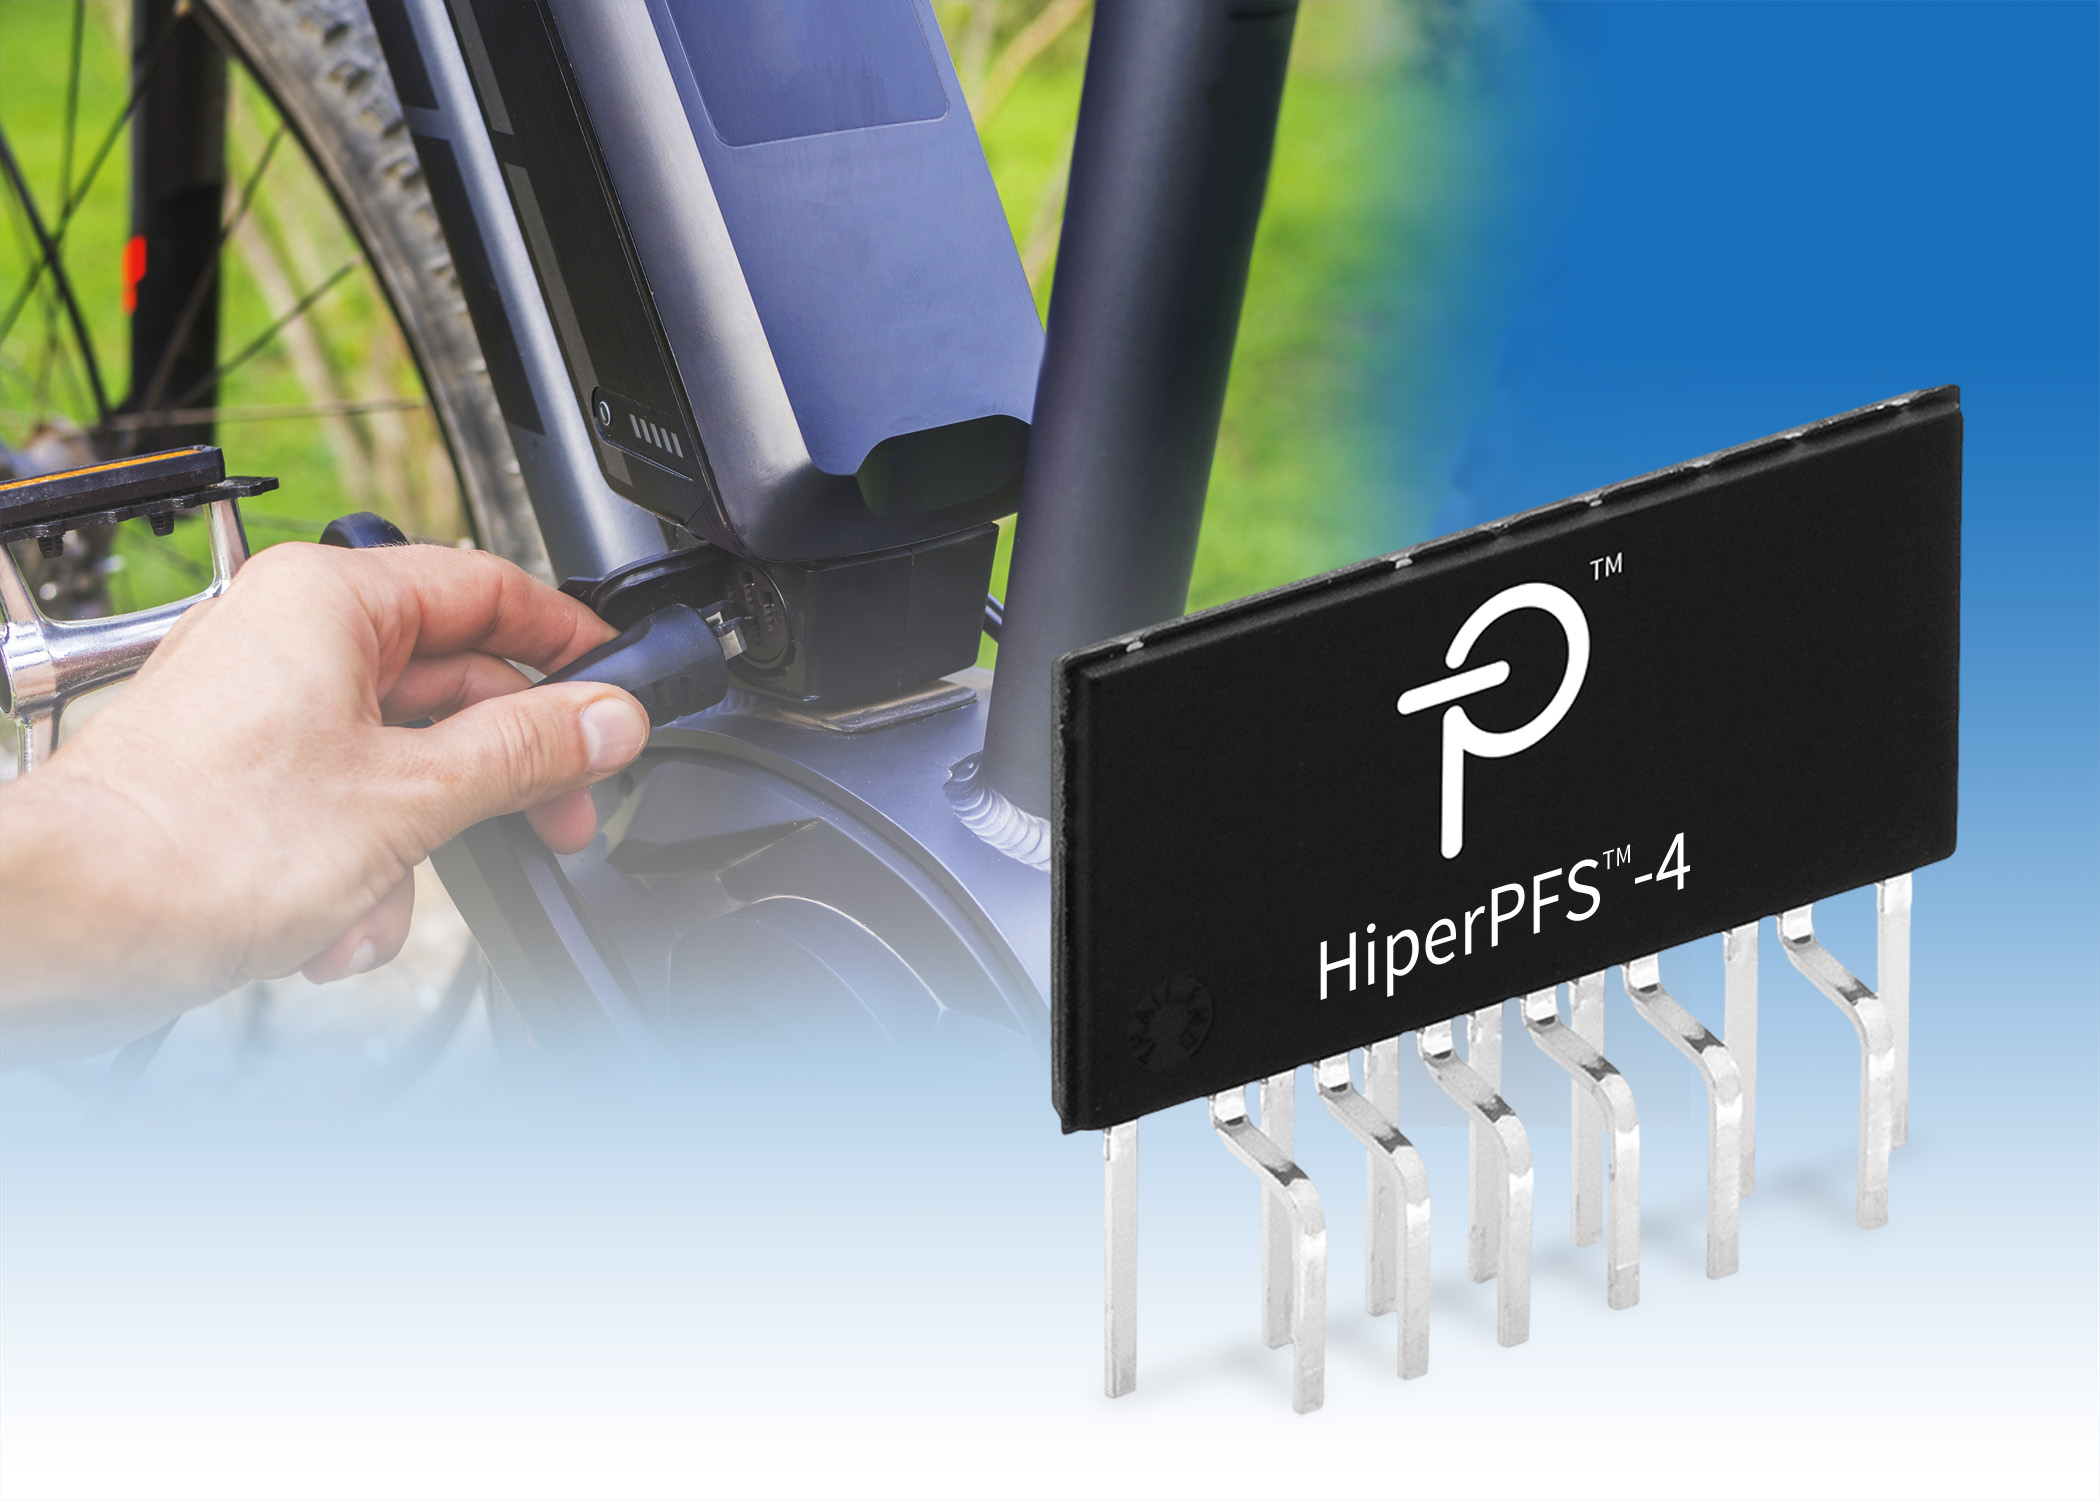 HiperPFS-4 Power Factor Correction ICs from Power Integrations Enable 98% Efficient PFC Designs Up to 550 W